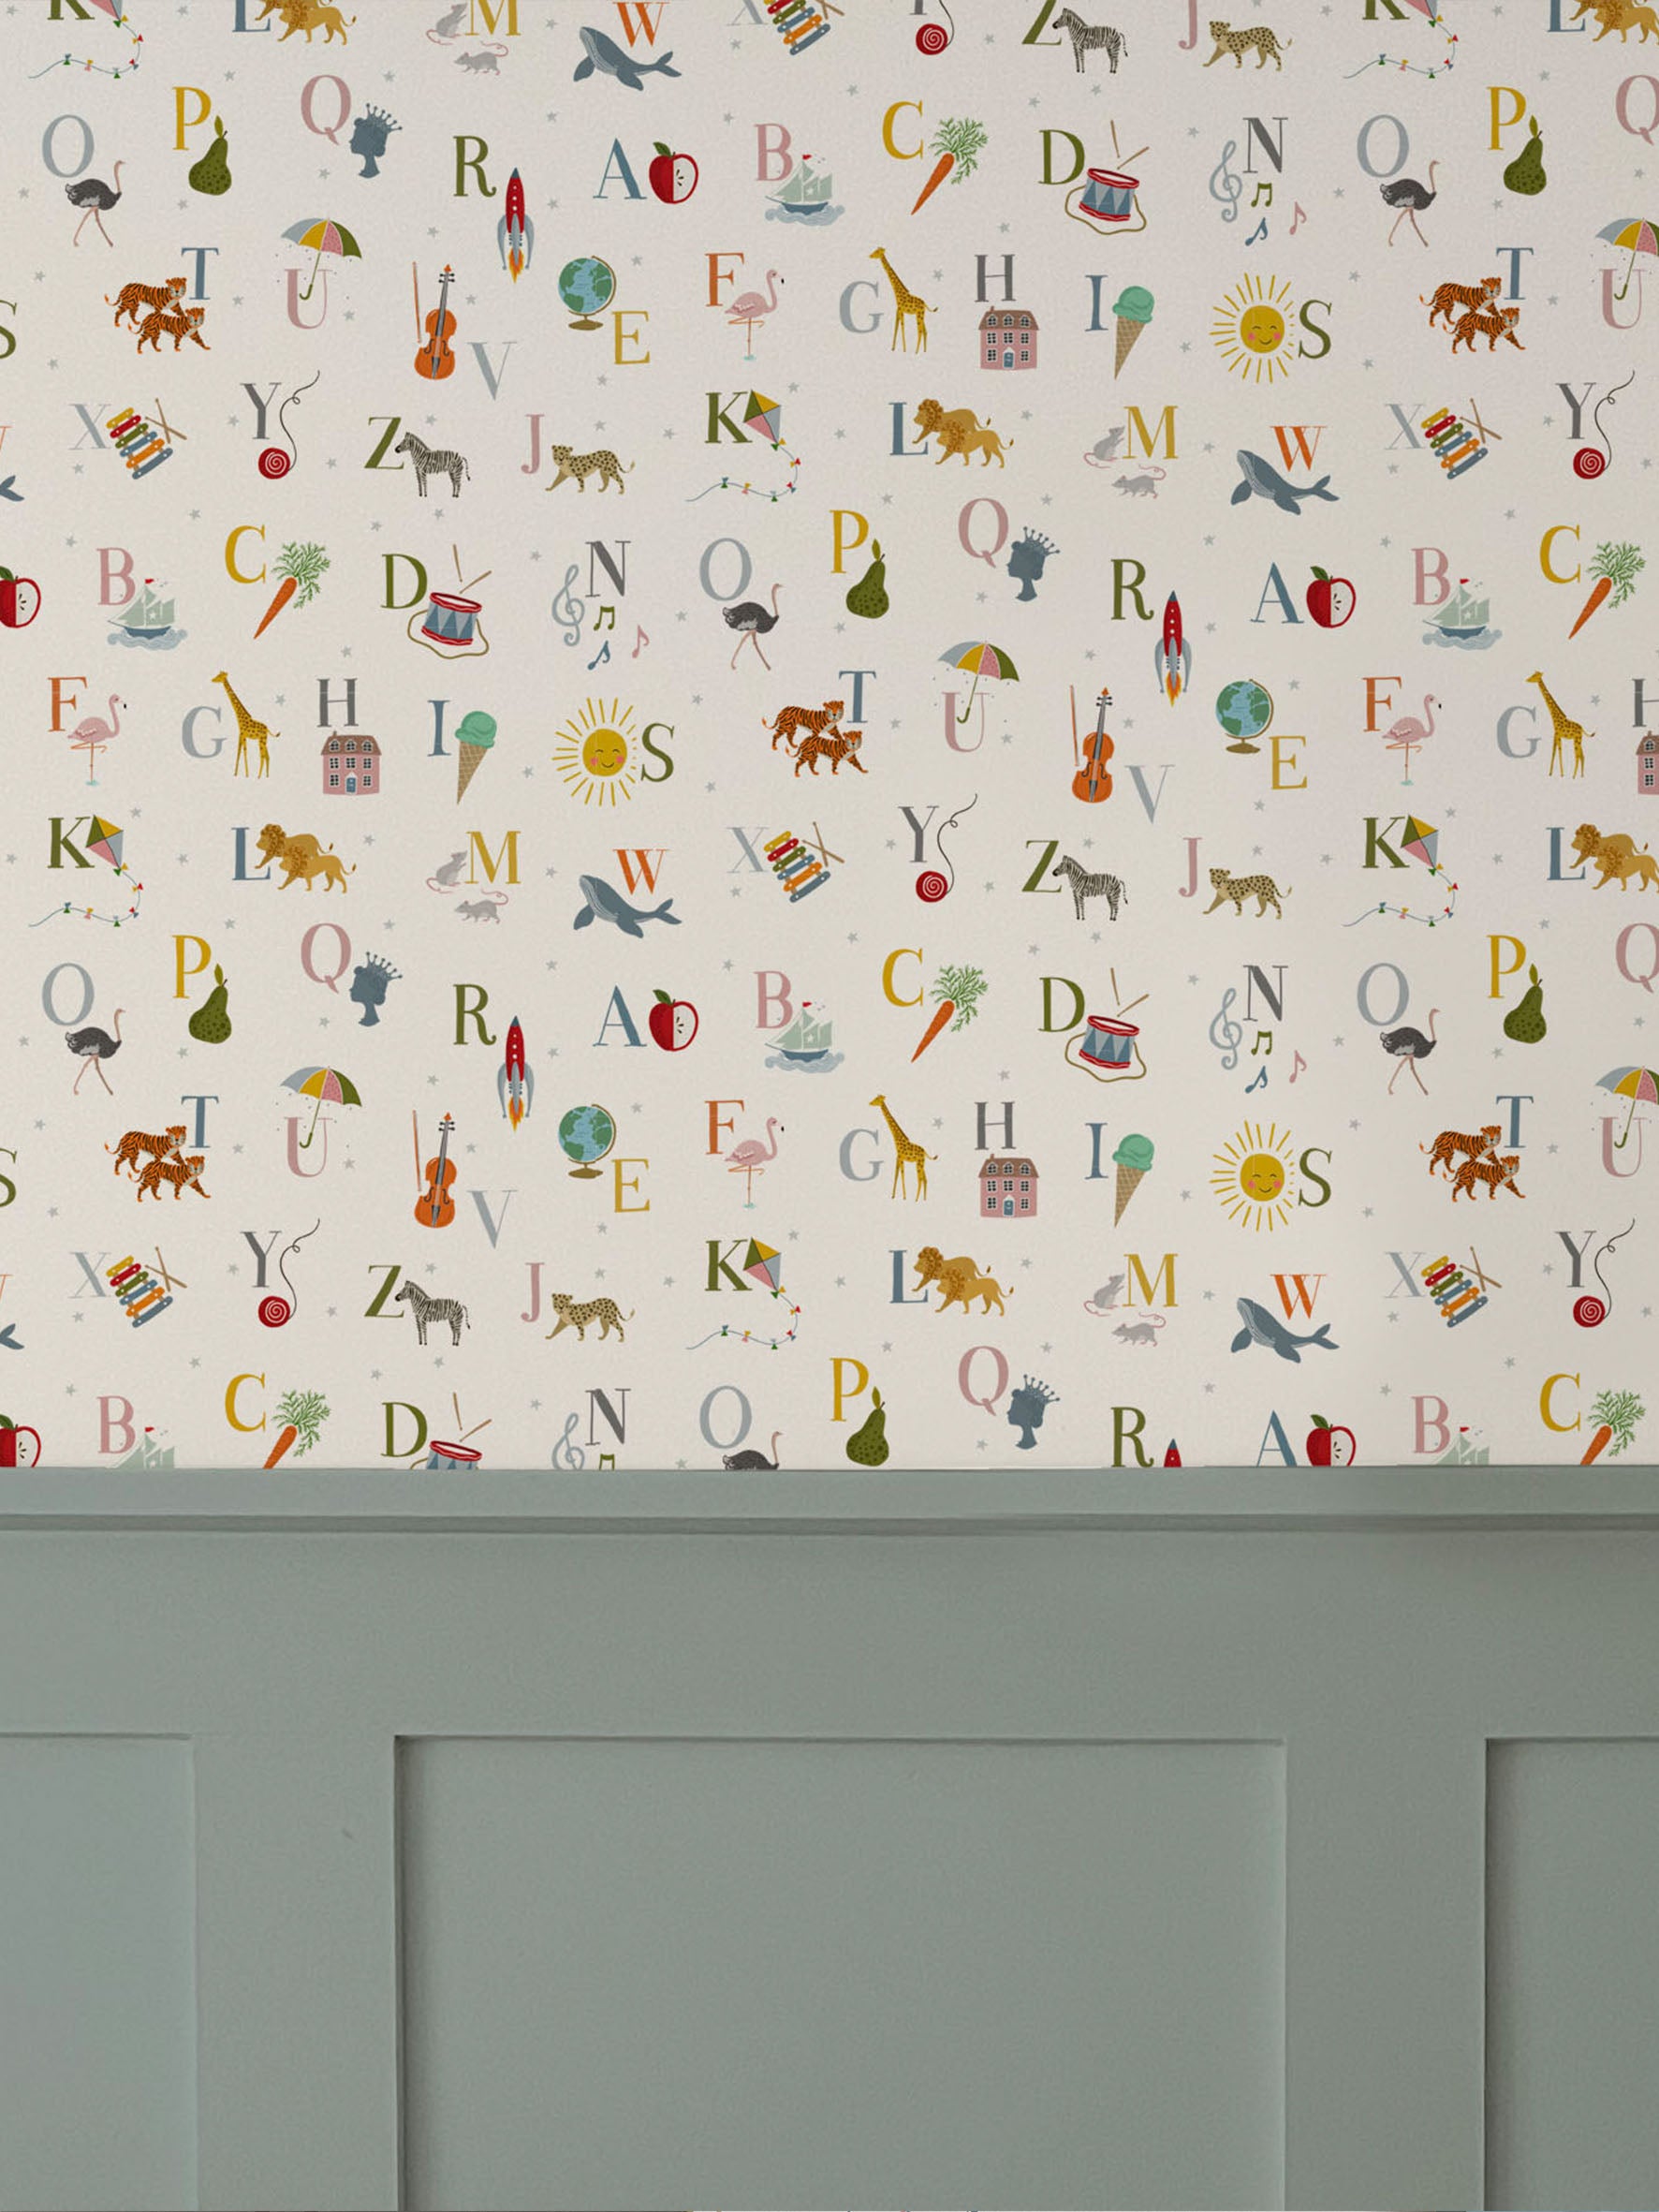 ABC luxury children's wallpaper above blue grey wall panelling